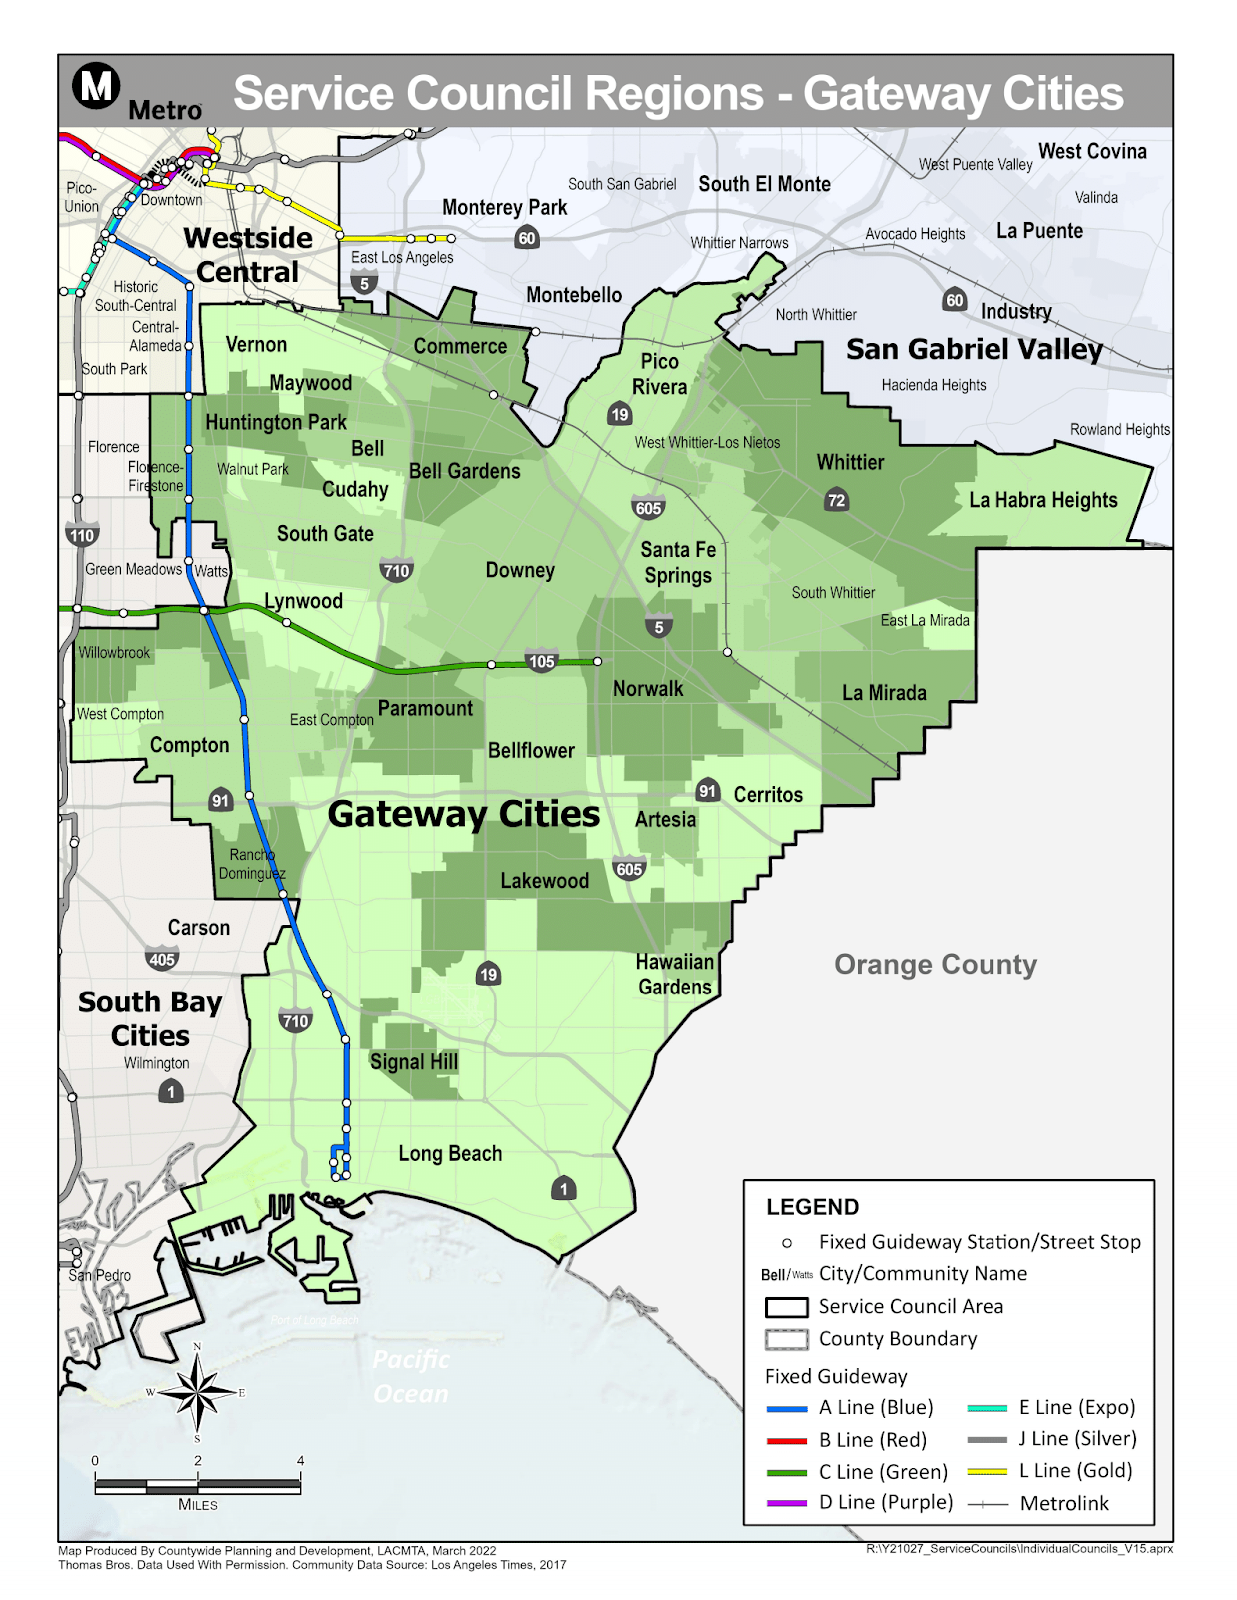 Los Angeles County Map titled "Service Council Regions - Gateway Cities"